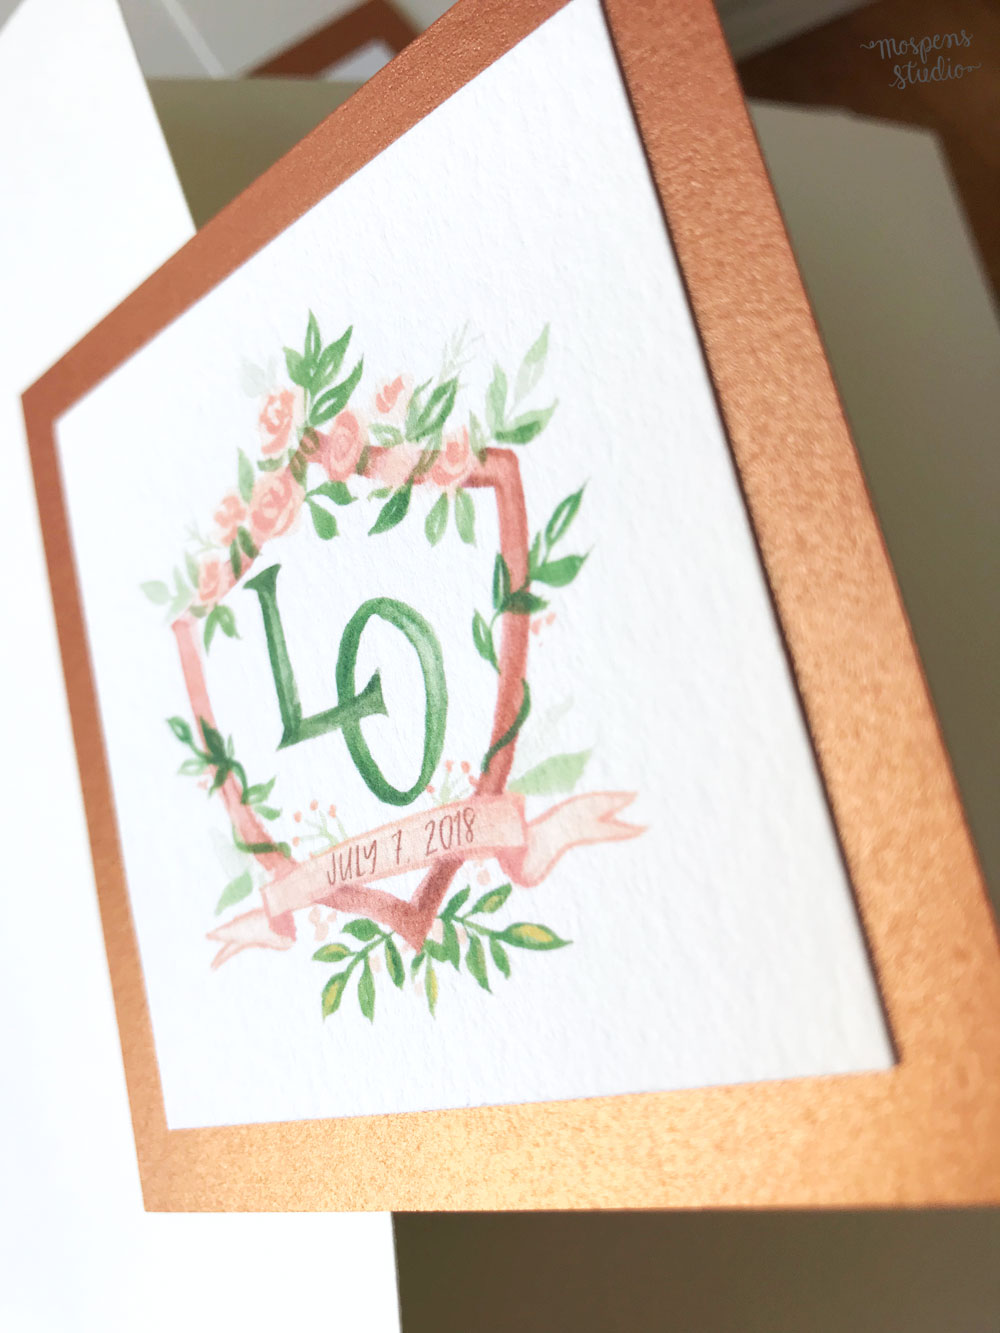 Gorgeous painted peach flowers and copper accents created an elegant floral wedding invitation for a summer wedding. 100% original art by Michelle Mospens. Luxe letterpress printing. Mospens Studio